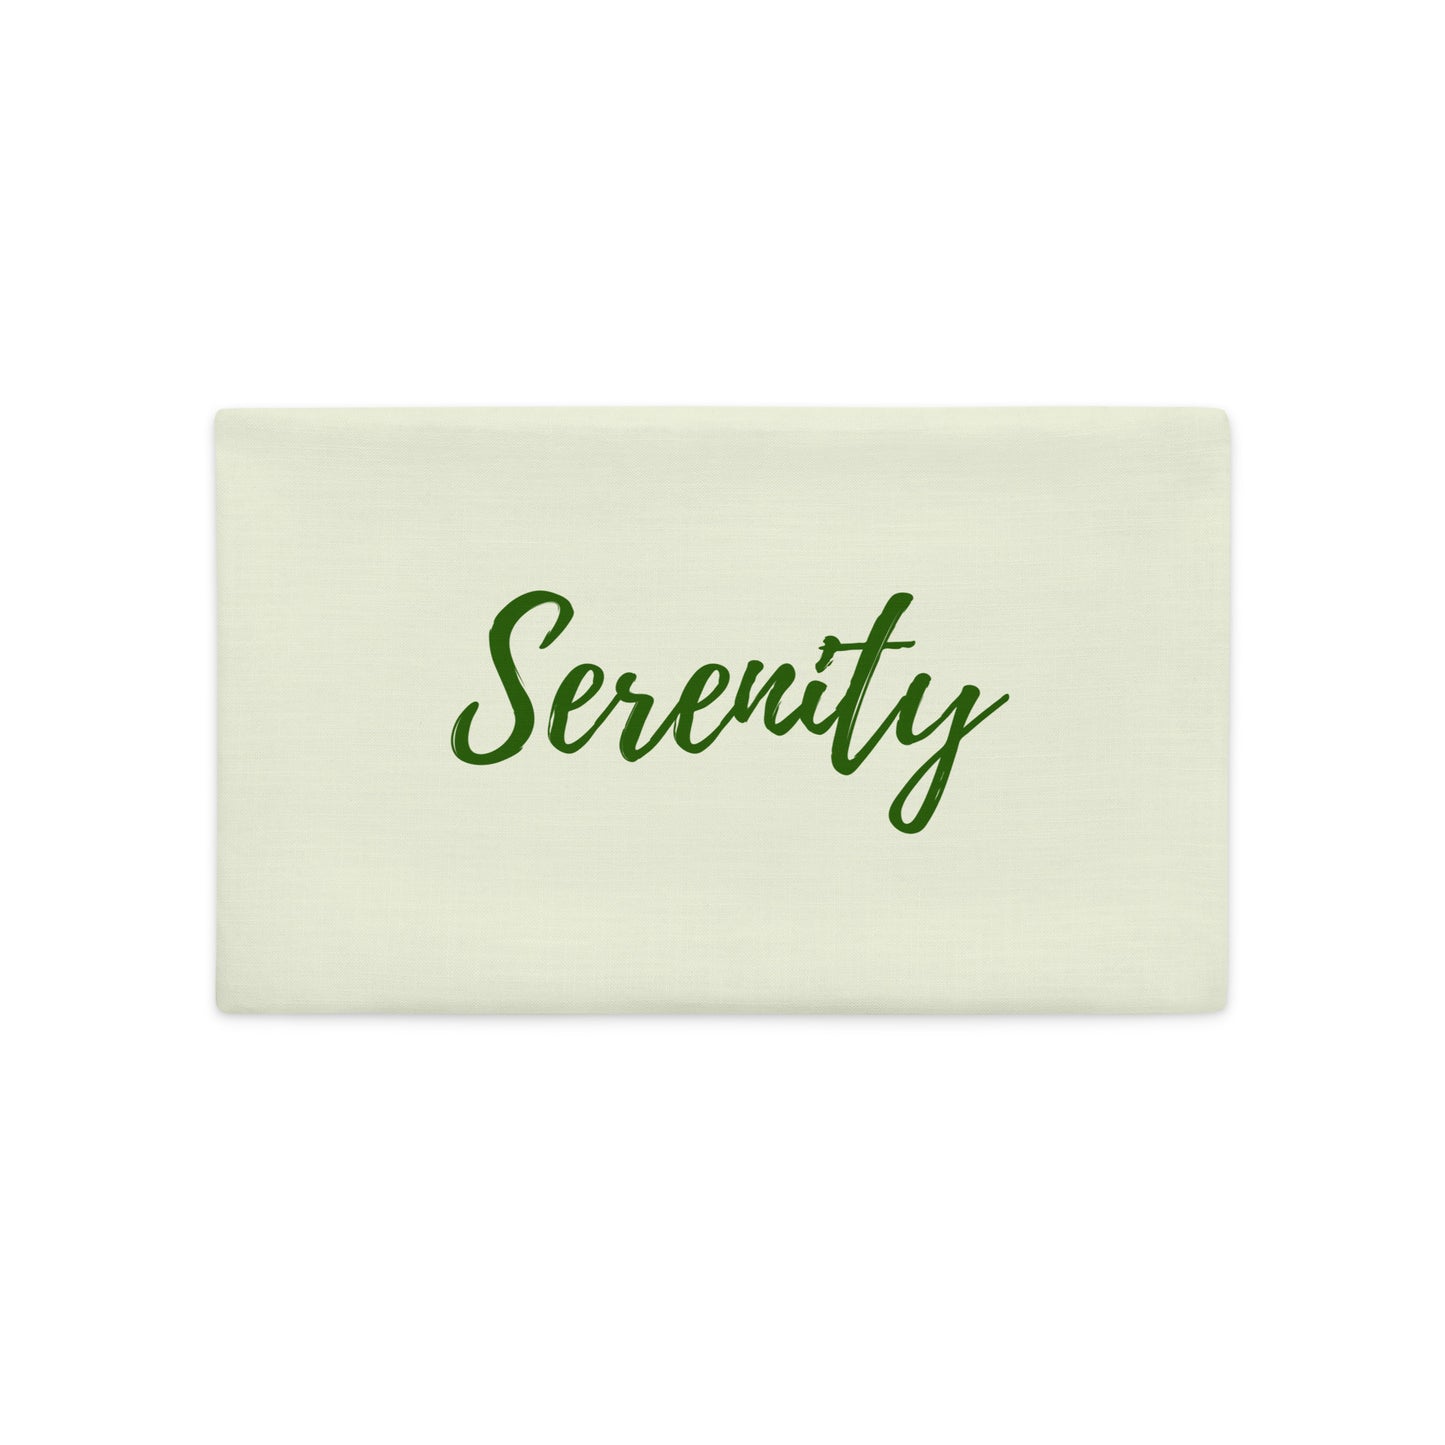 Forest of Serenity: Premium Cushions Covers 20"x12"